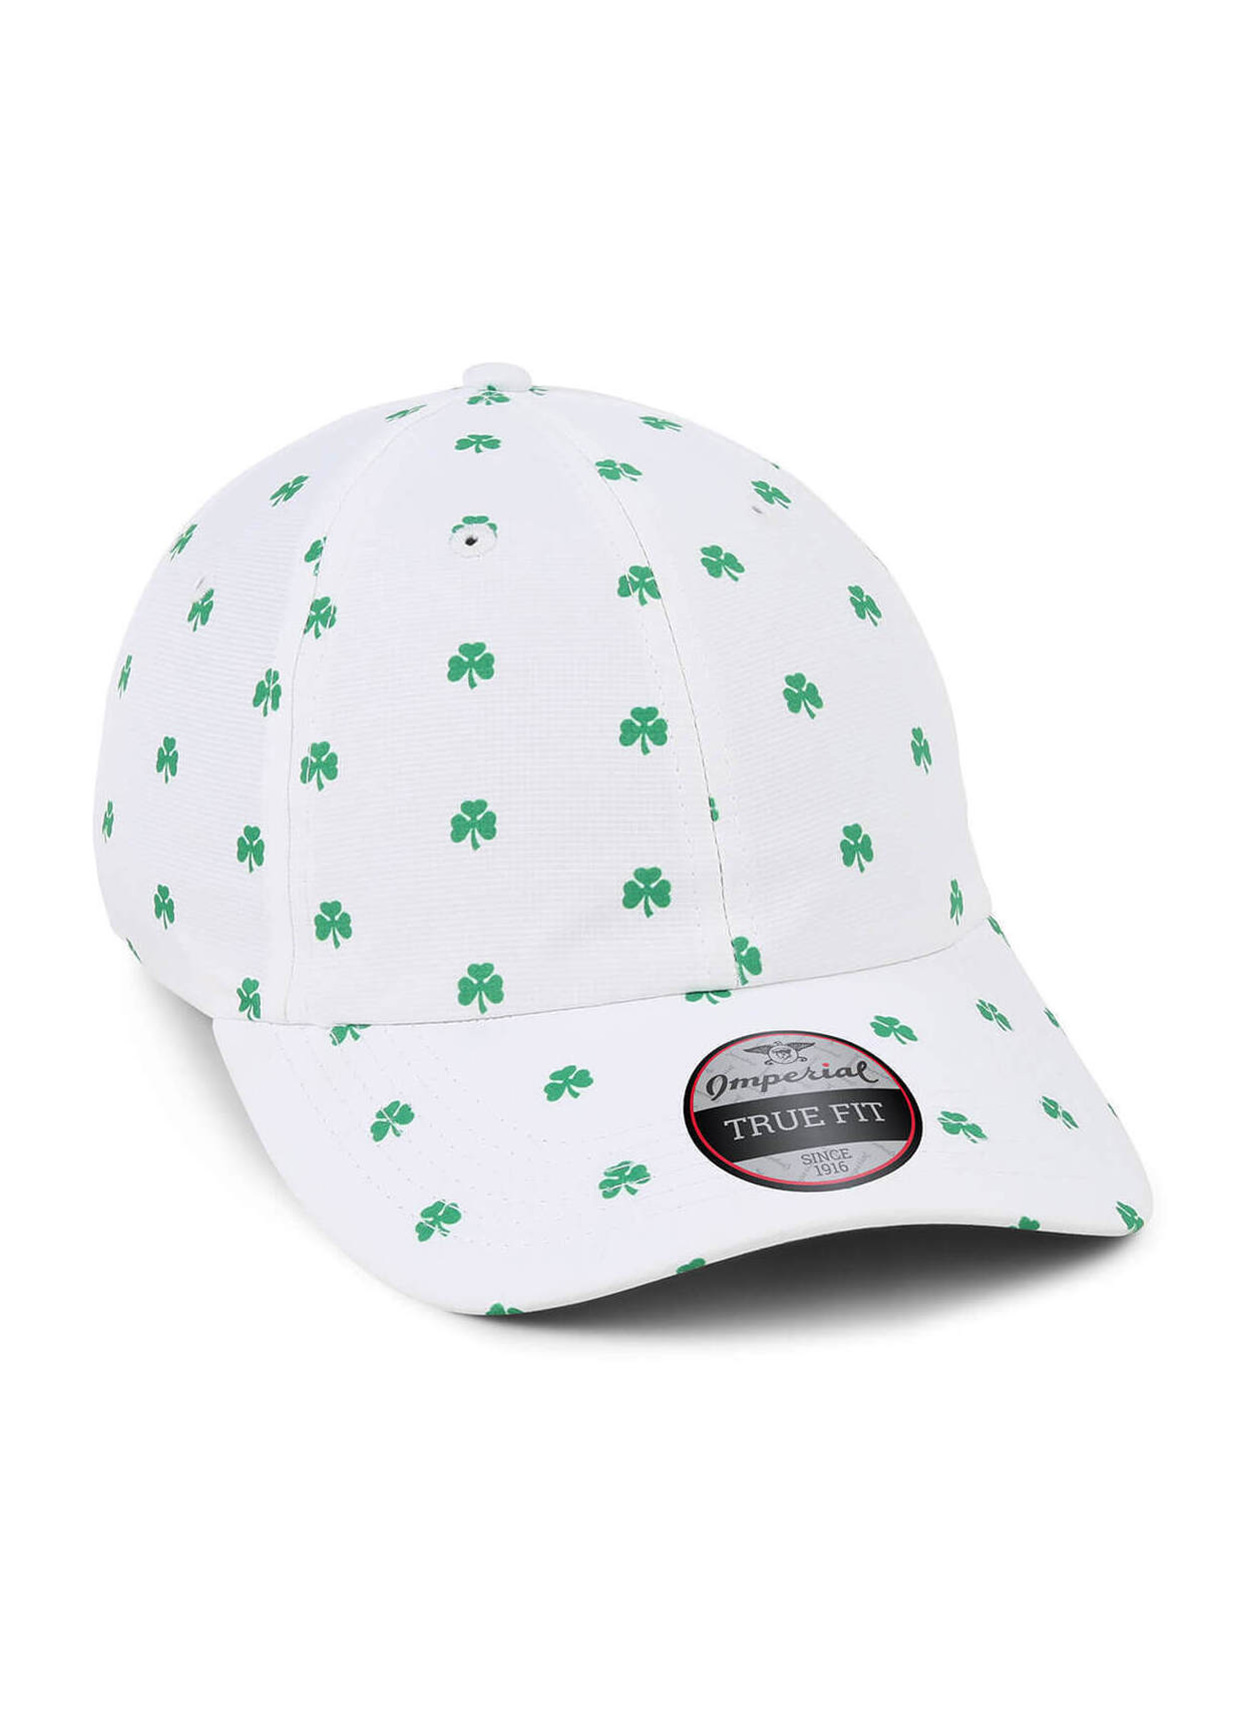 Imperial White / Green Clover The Alter Ego Pattered Performance Hat